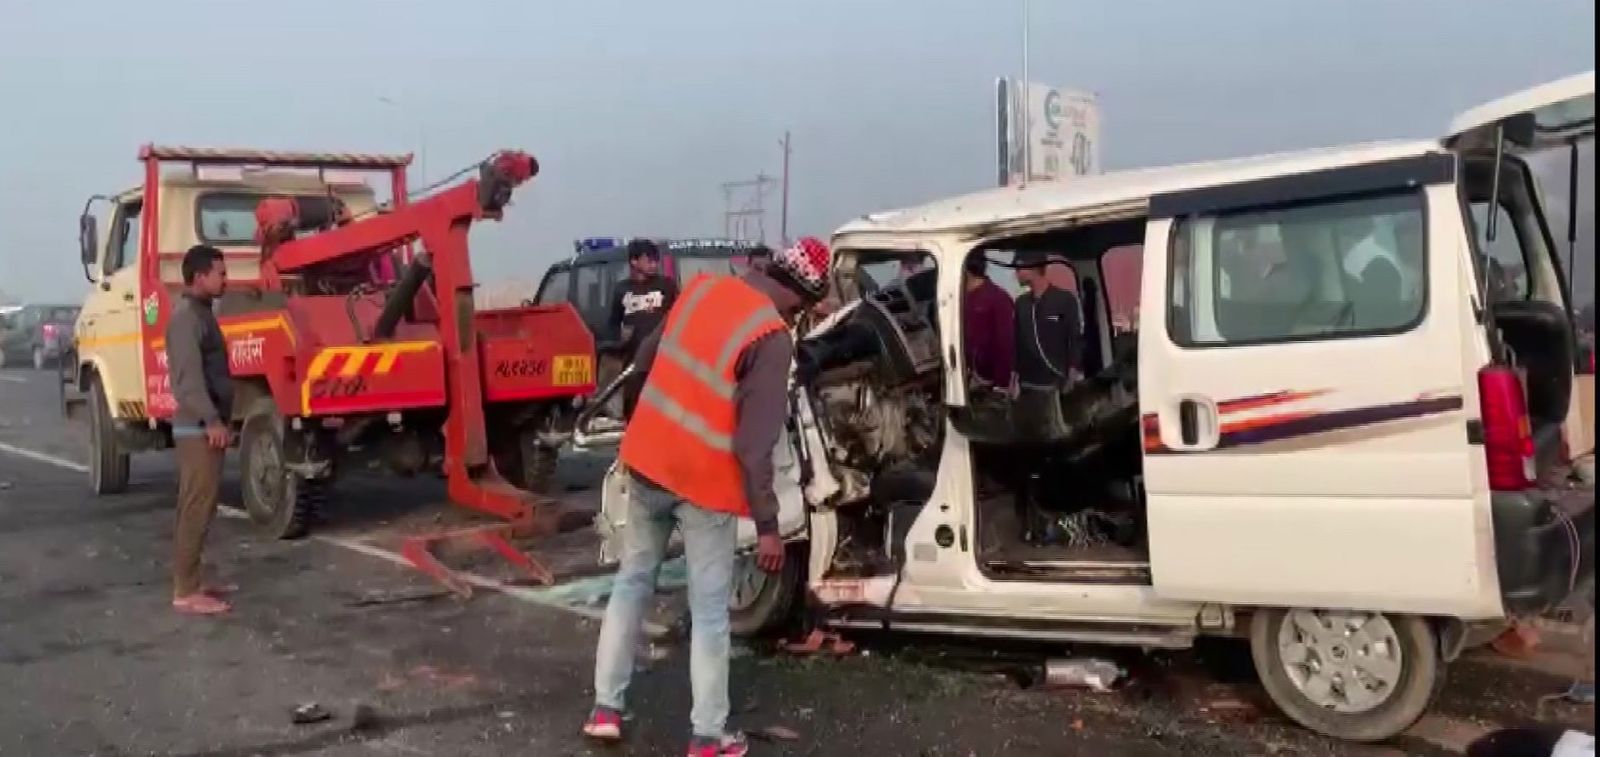 15-20 Vehicles Collided on Delhi-Lucknow Highway